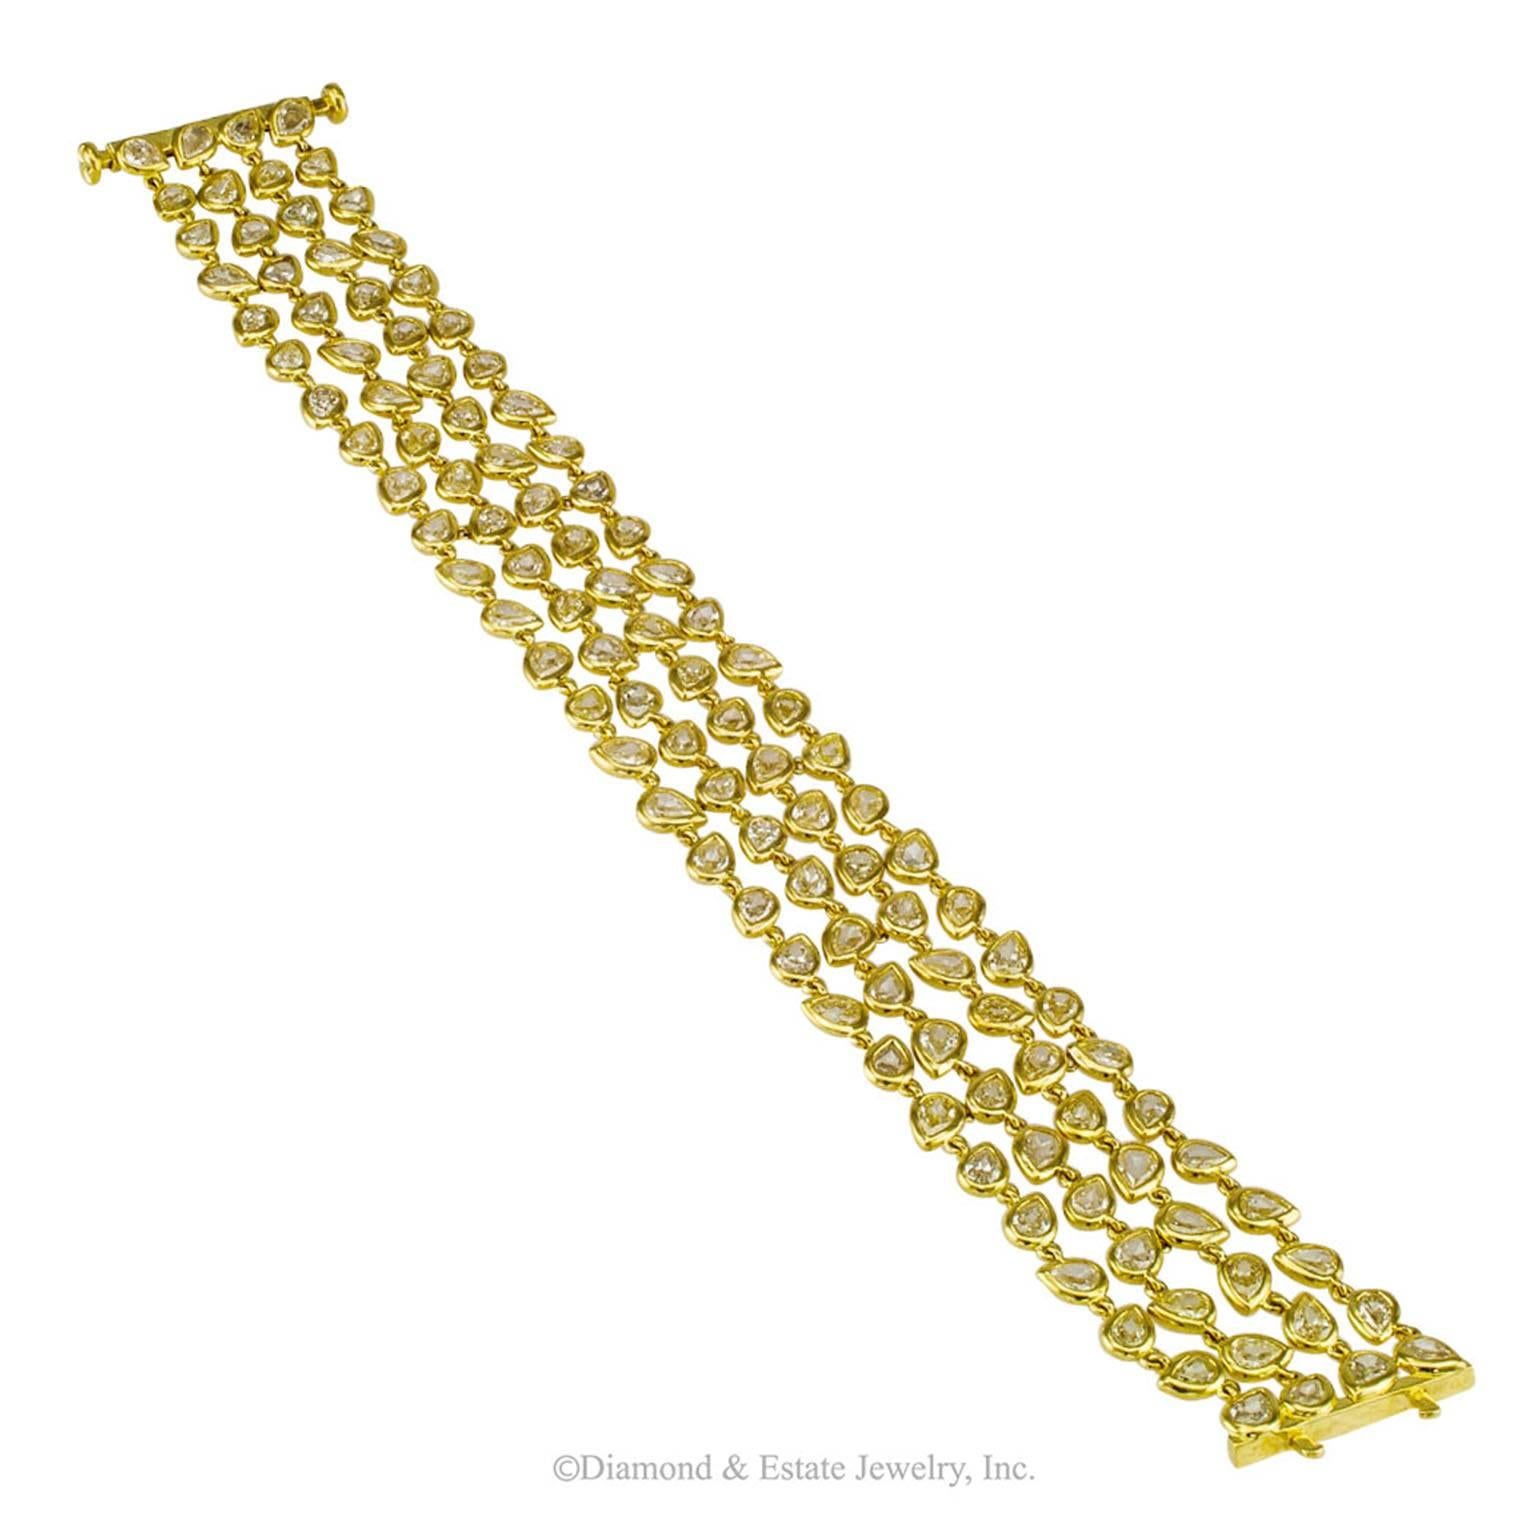 11.00 Carats Pear Shaped Diamond Gold Bracelet

11.00 carats pear-shaped diamond bracelet mounted in 18-karat yellow gold.  Comprising four articulated courses of bezel-set pear-shaped diamonds, the one hundred twelve diamonds totaling approximately